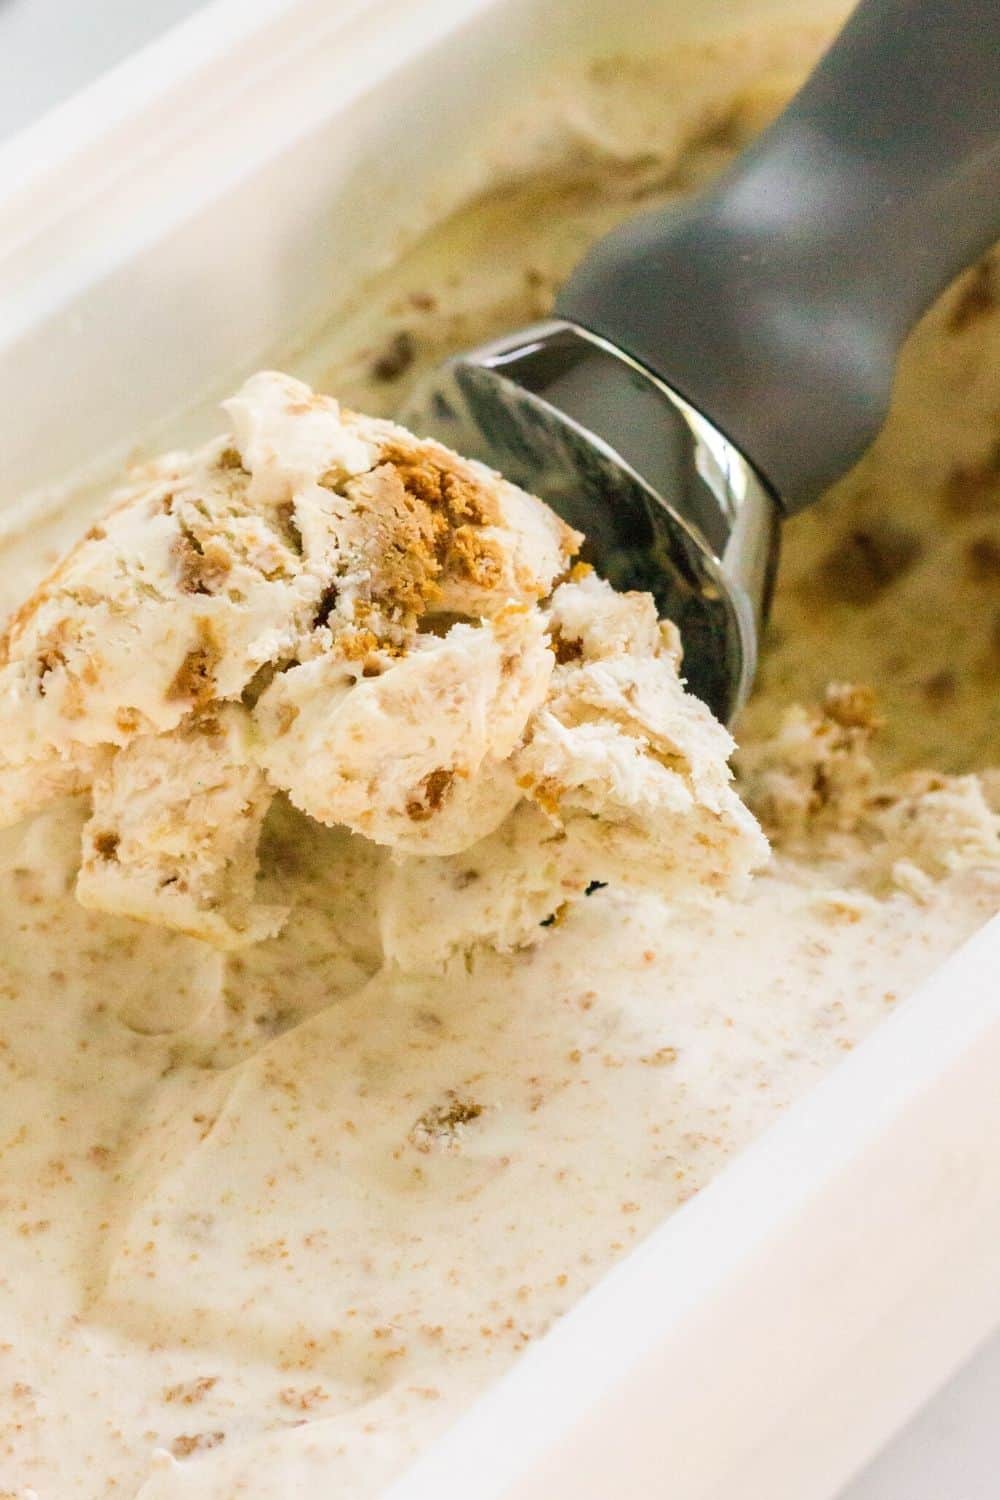 an ice cream scoop is scooping out some homemade lotus biscoff ice cream from its freezer container.